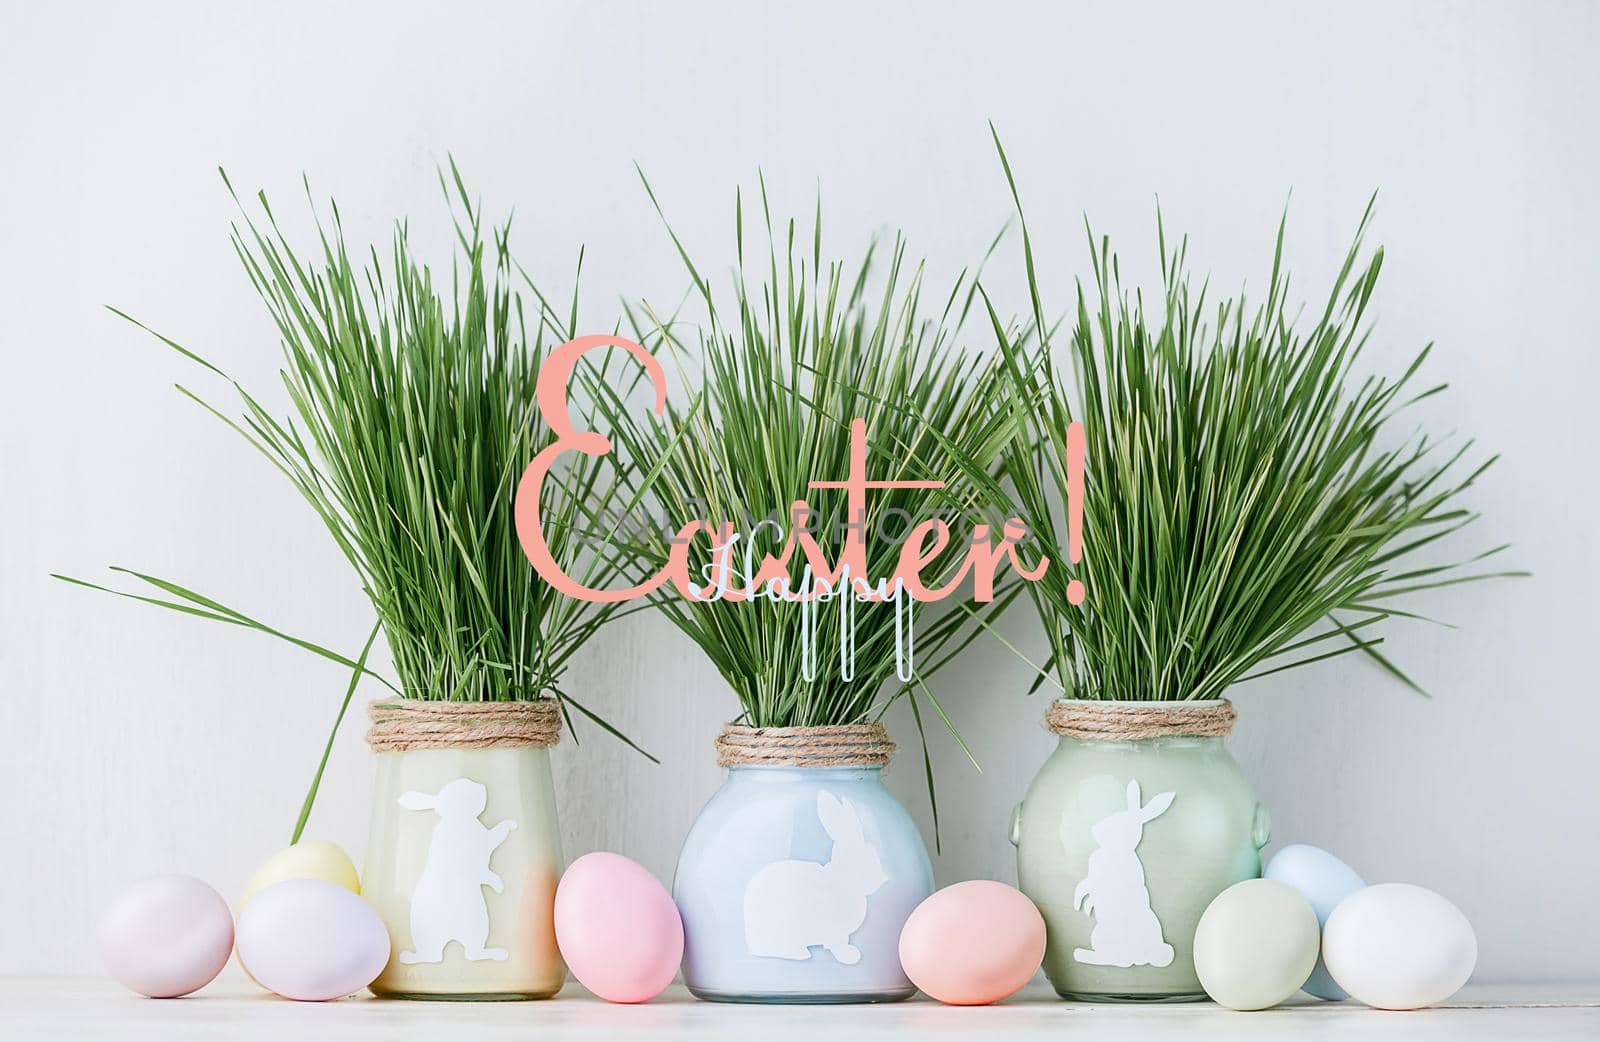 Cute creative photo with easter eggs